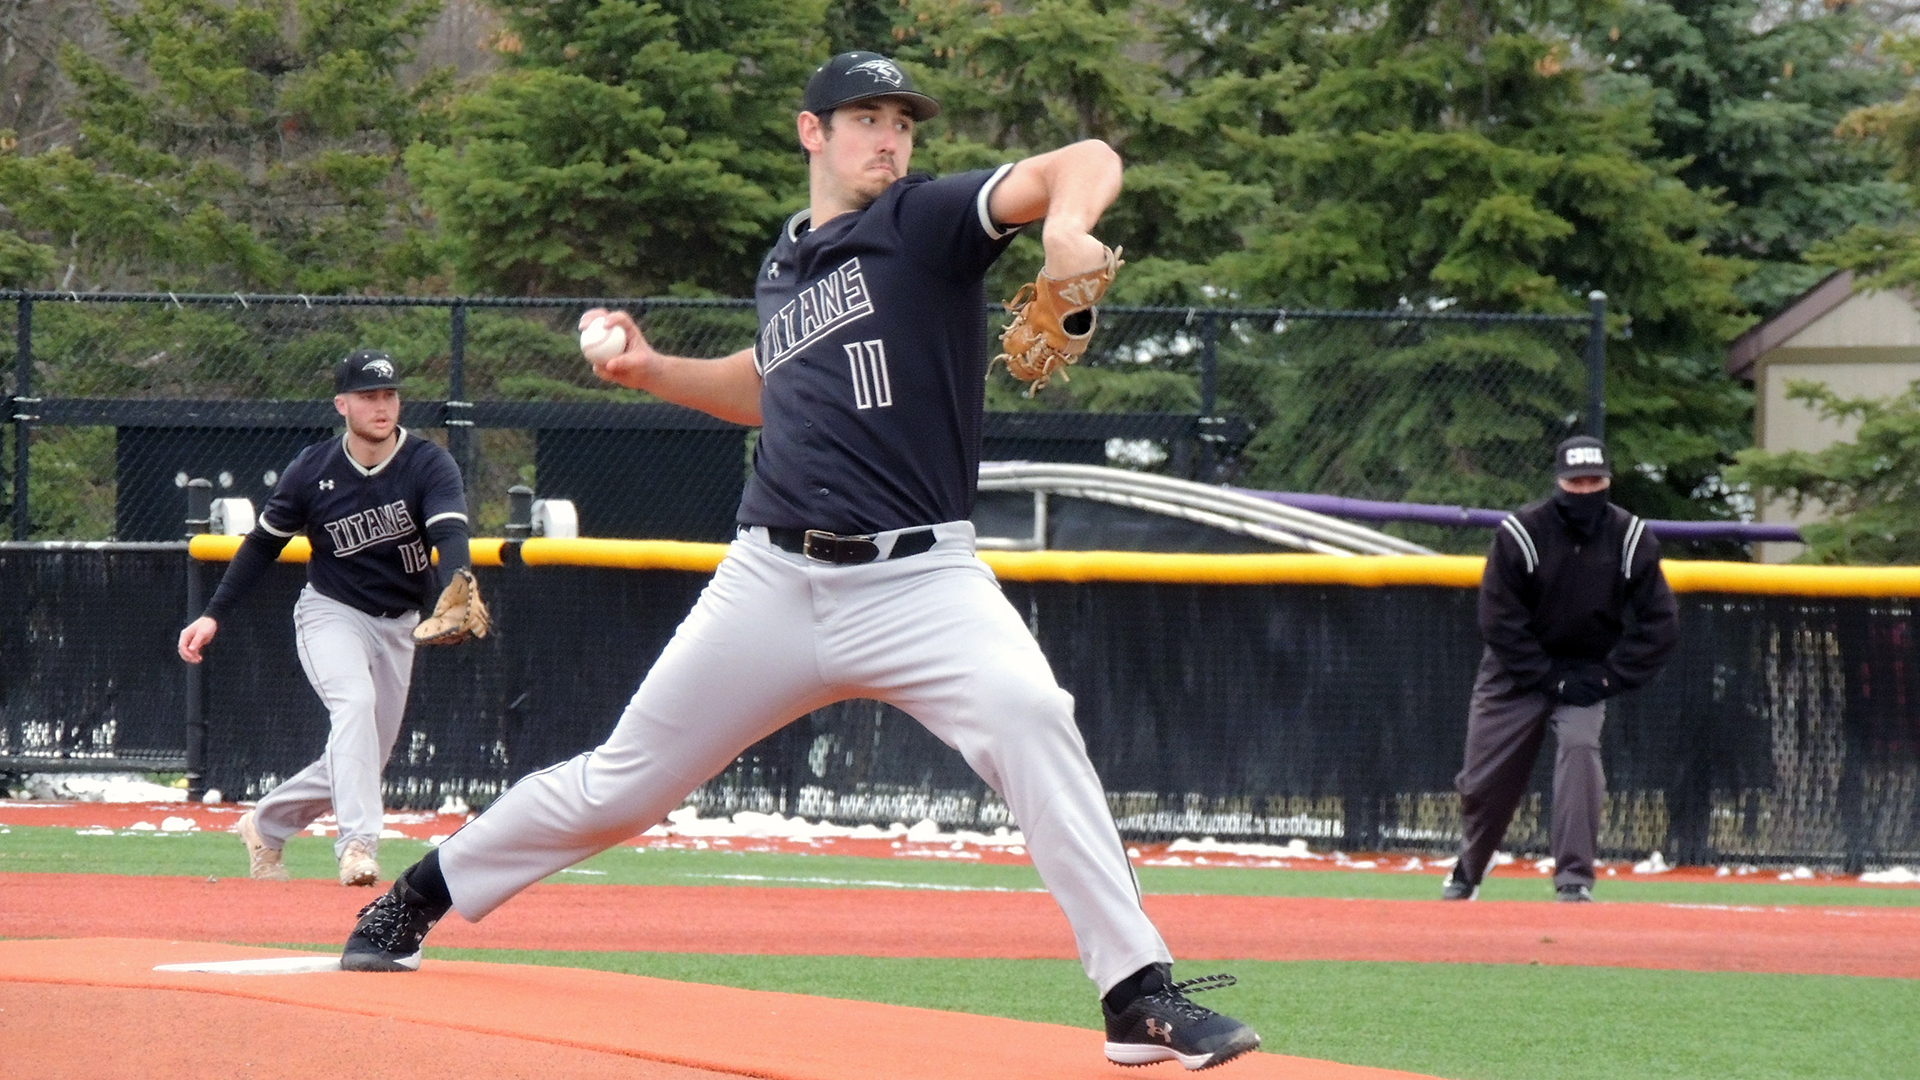 Harry Orth pitched seven innings against the Warhawks in the opener and allowed just six hits and three runs.